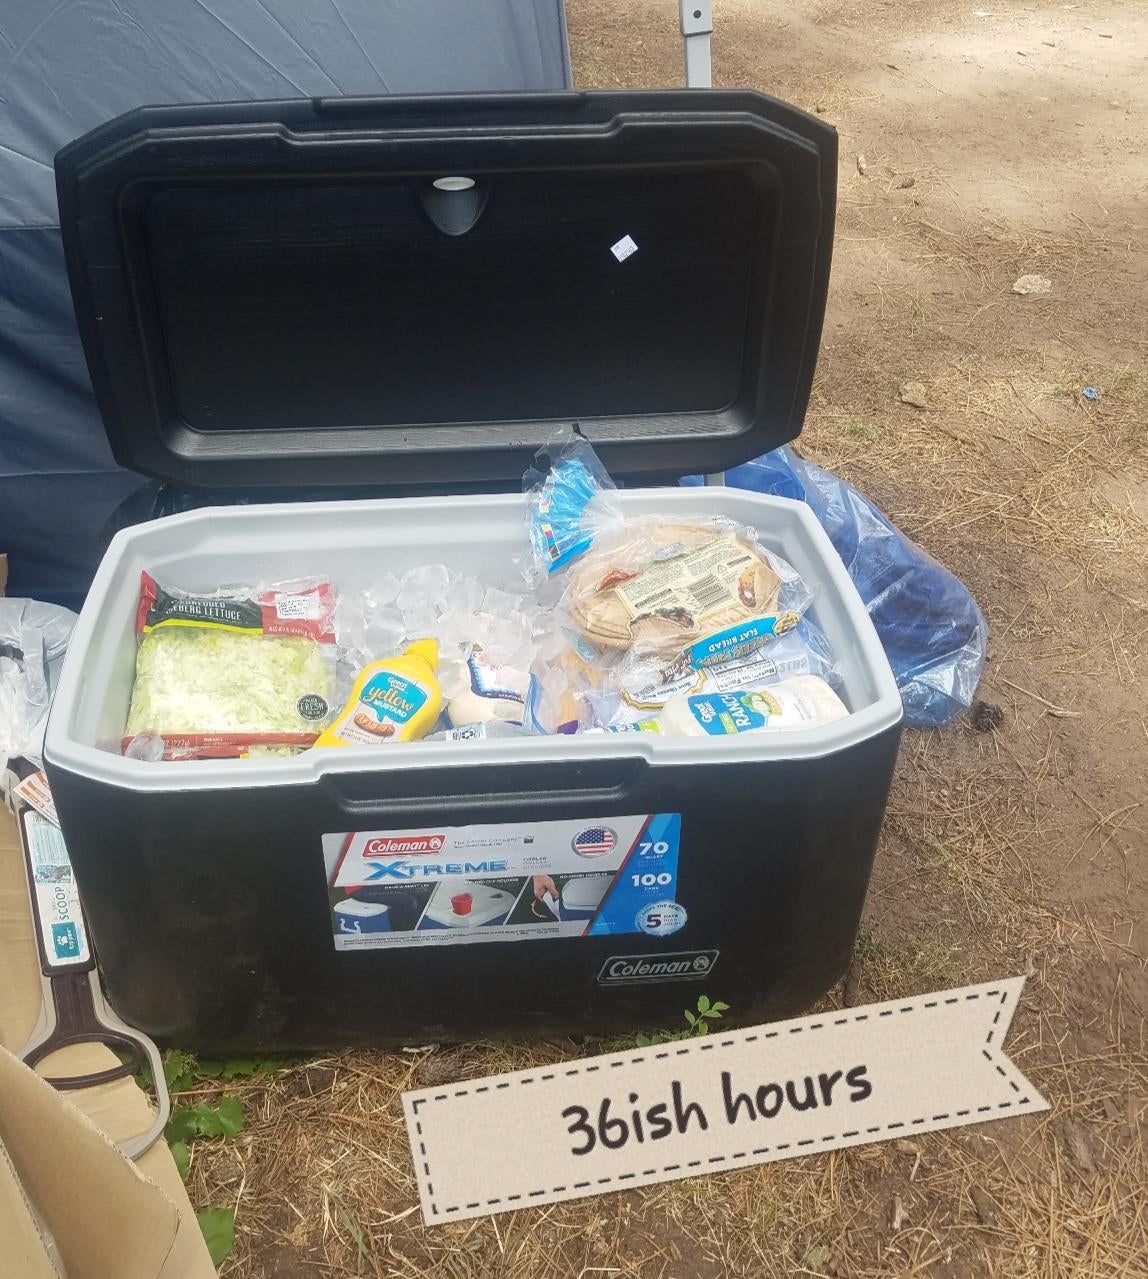 Reviewer pic of the cooler with drinks and snacks inside and overlay text that says 